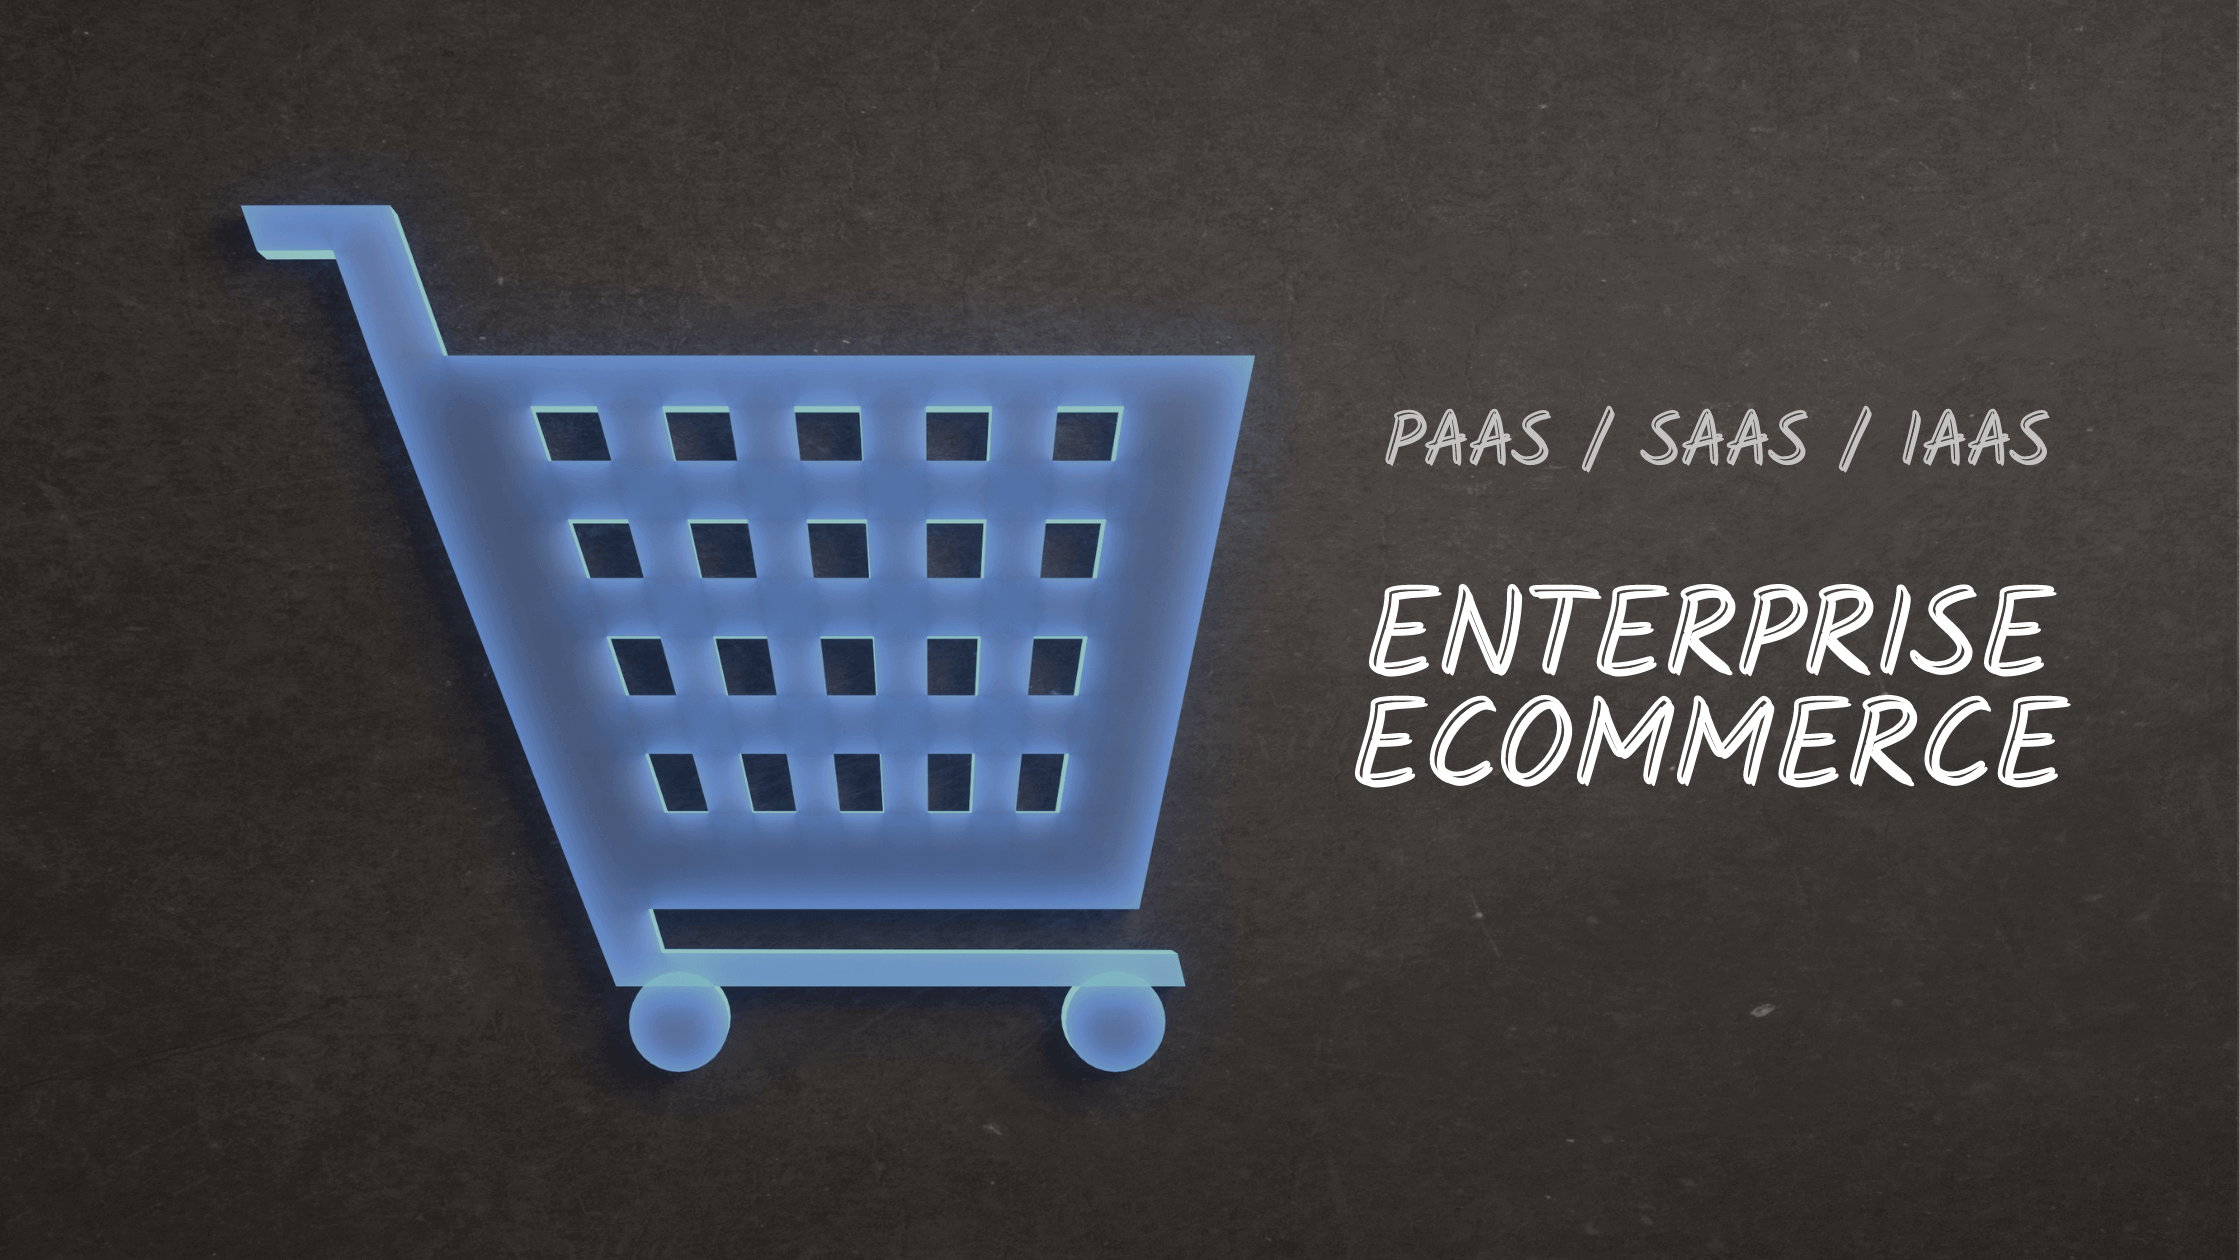 PaaS / SaaS / IaaS Enterprise eCommerce Solutions: Which One Is Right For Your Business?